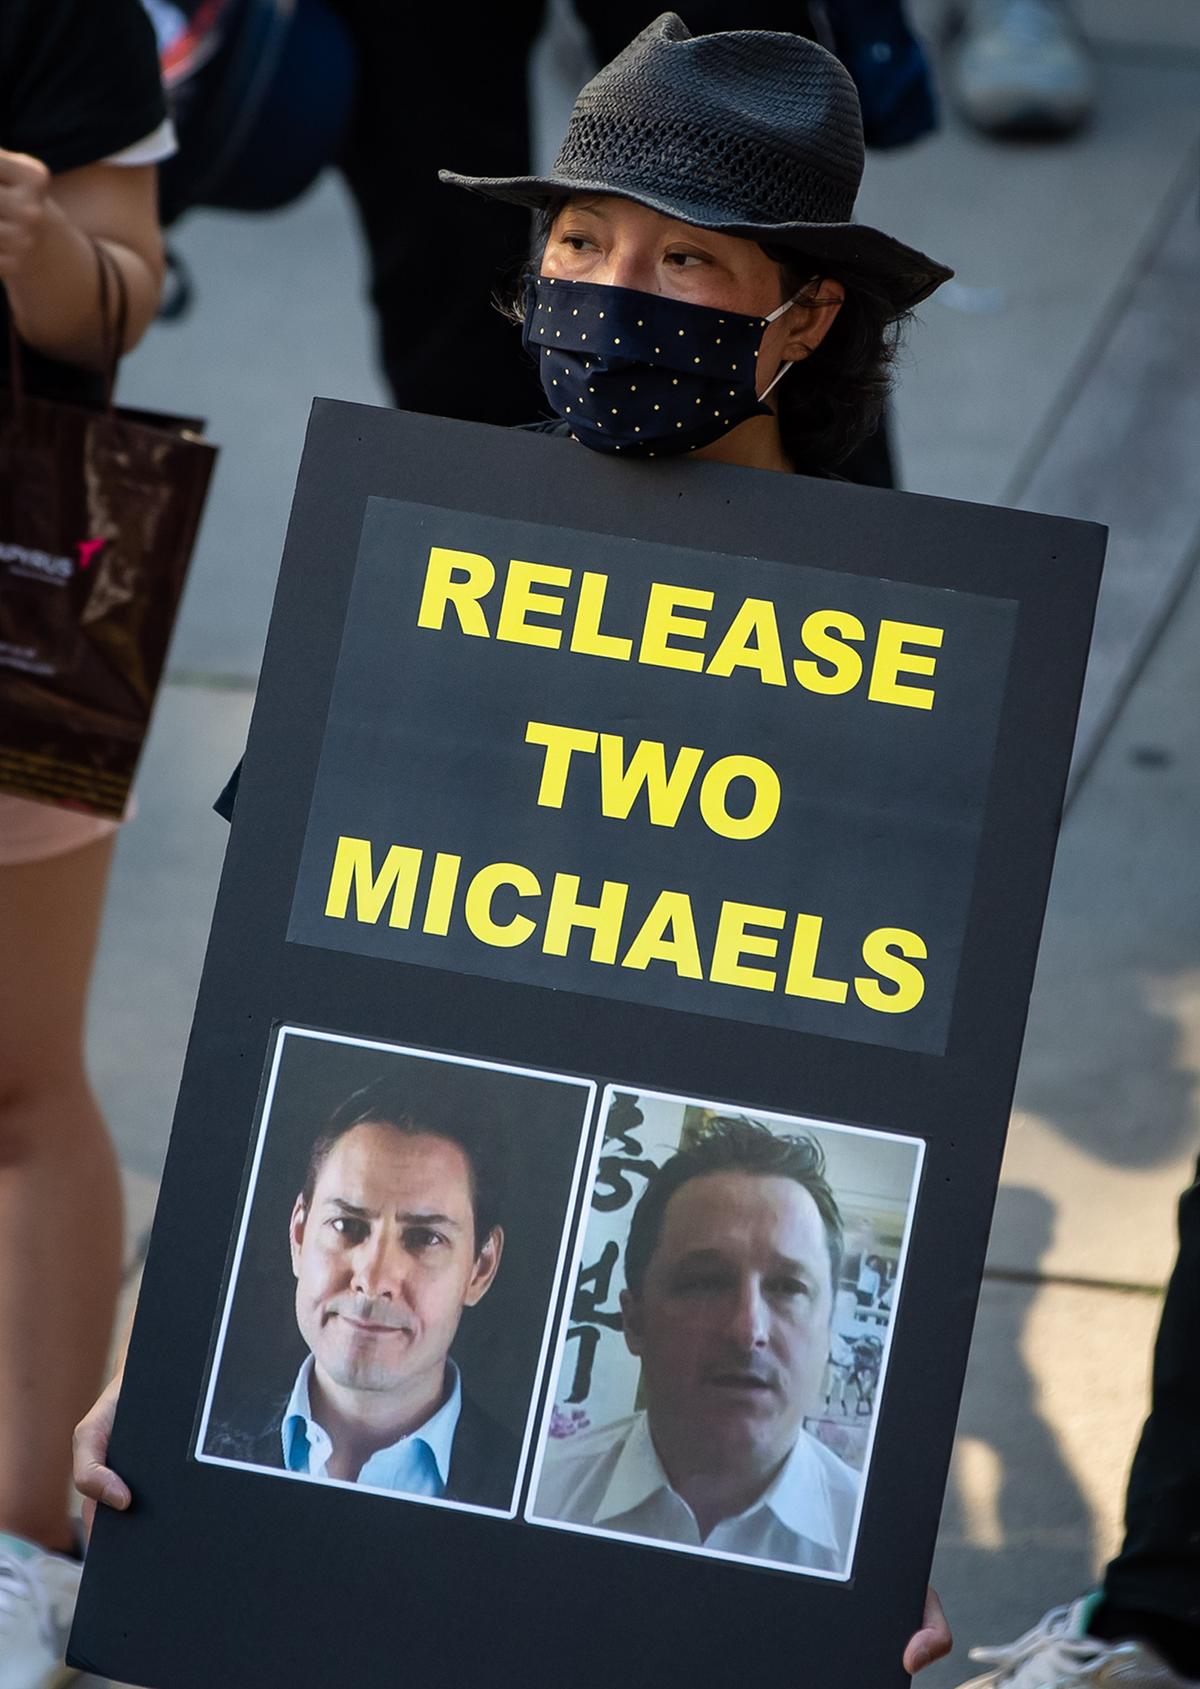 A woman holds a sign with photographs of Michael Kovrig (L) and Michael Spavor (R), who have been detained in China since December 2018, during a rally in support of Hong Kong democracy in Vancouver, Canada, on Aug. 16, 2020. (The Canadian Press/Darryl Dyck)